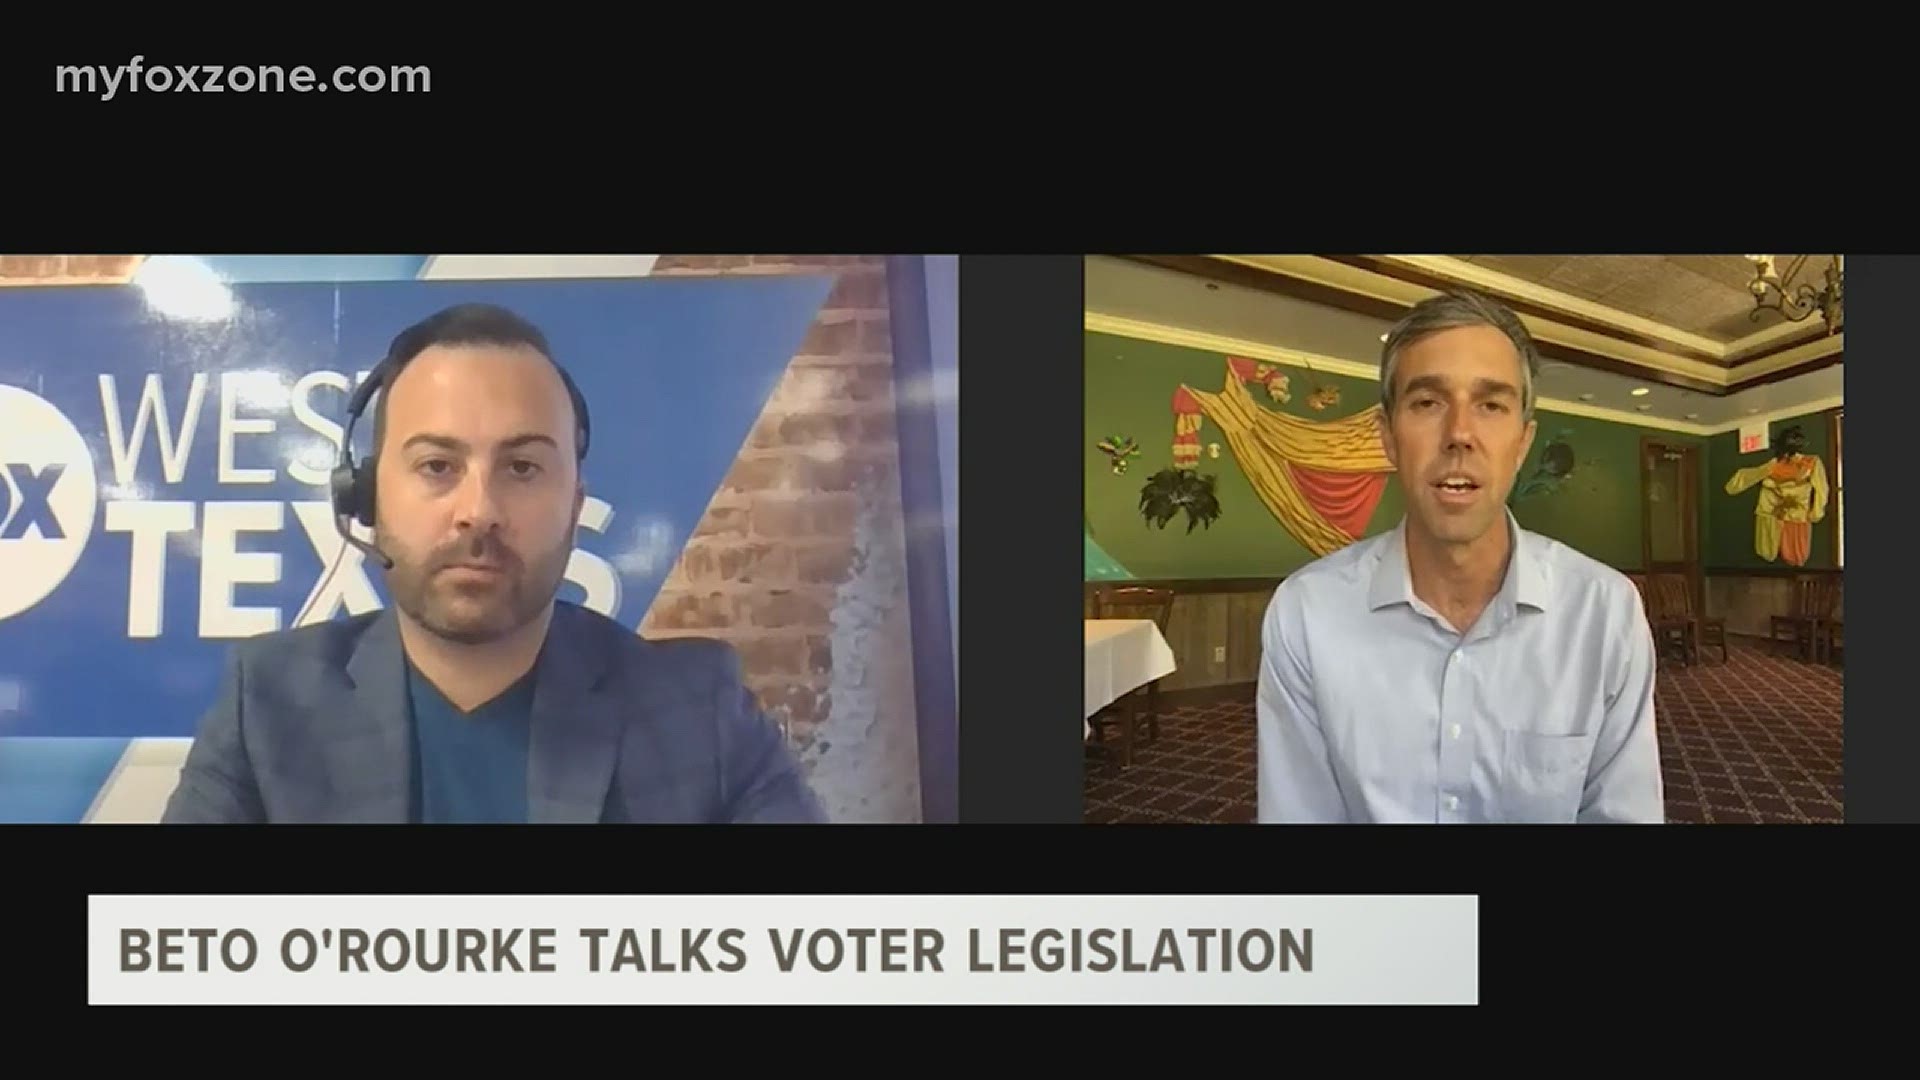 Tim O'Brien and Beto O'Rourke talk voting rights, the border and future plans.